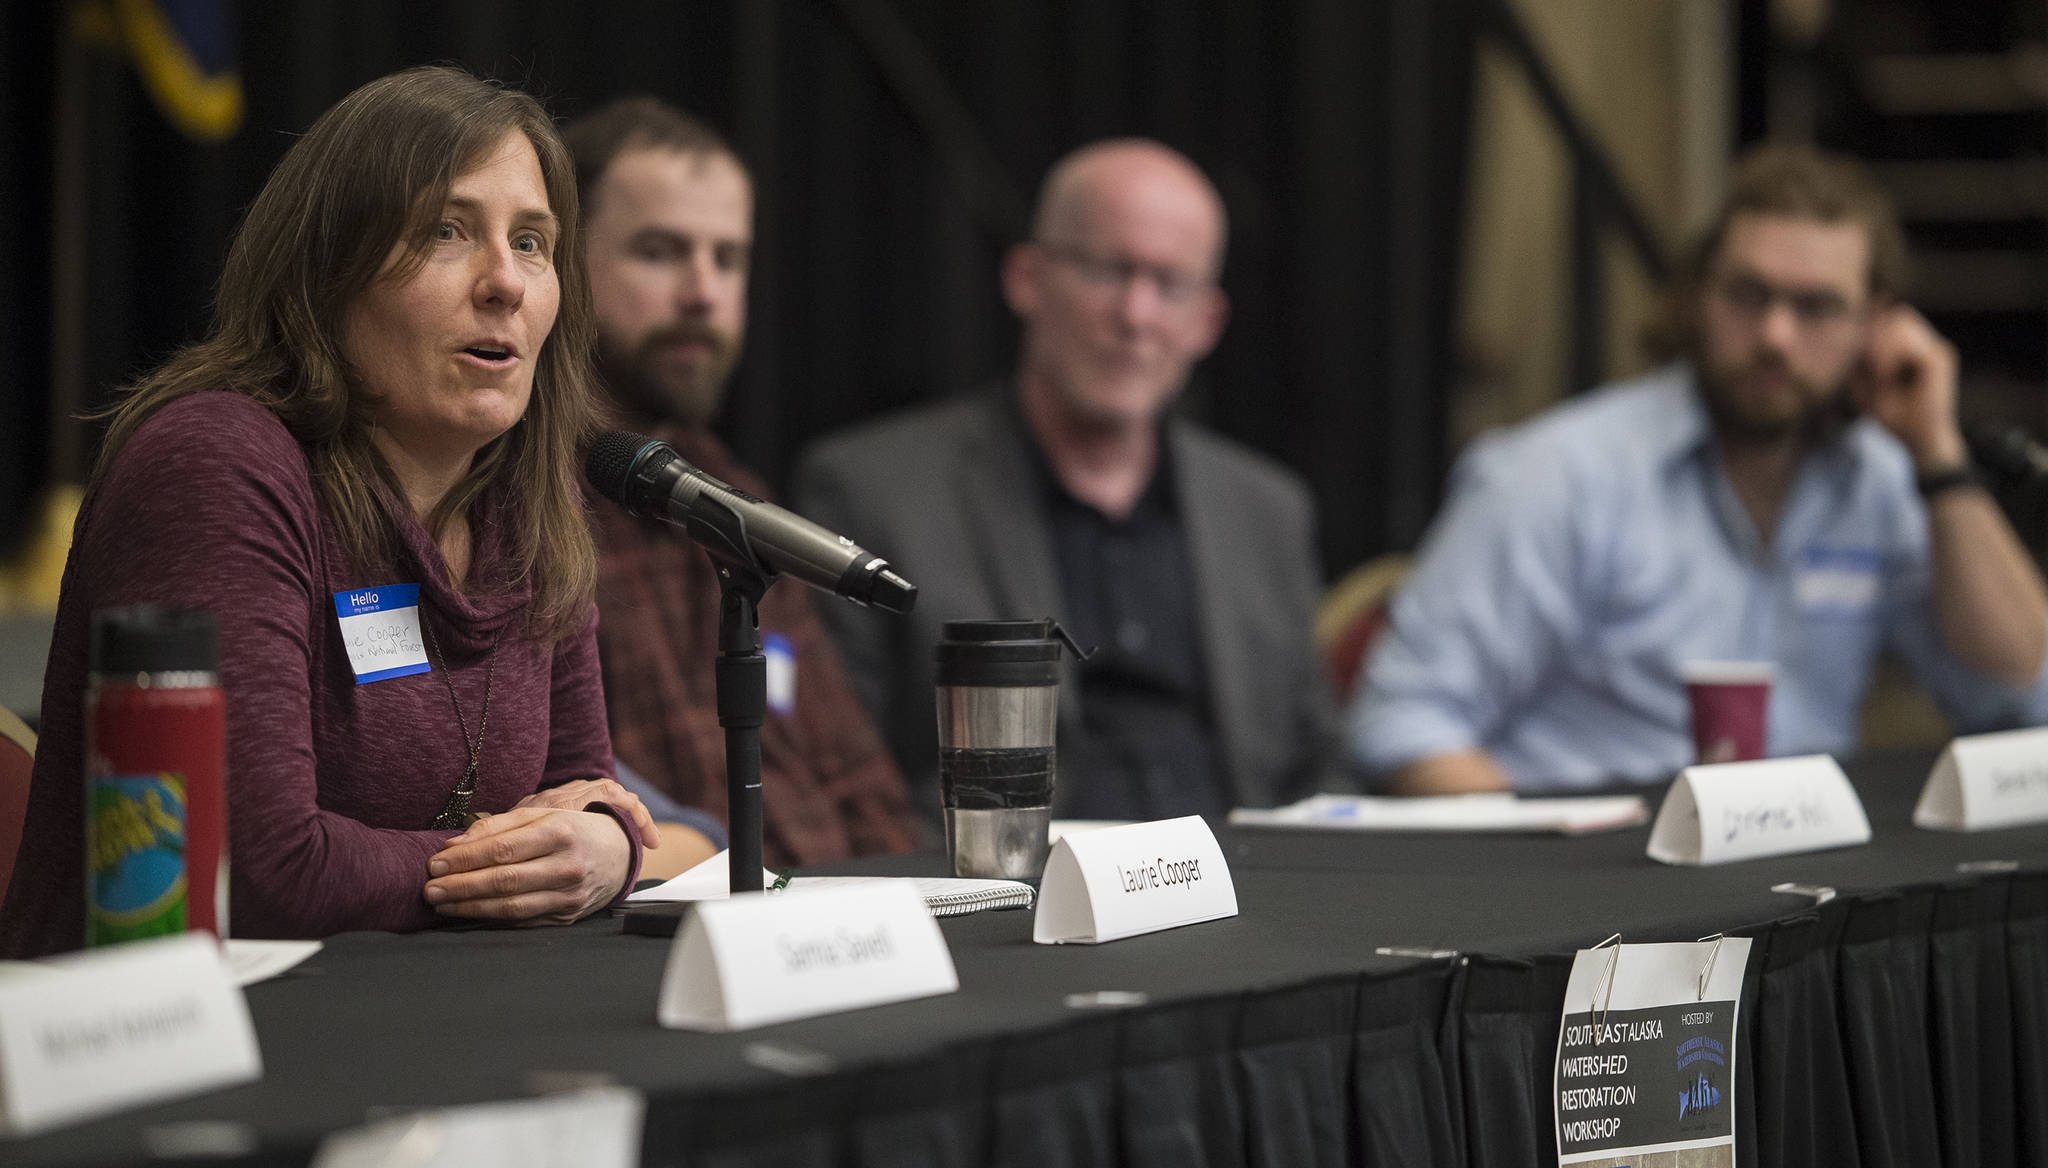 Laurie Cooper, of the U.S. Forest Service, speaks during a panel discussion on getting community groups, agencies, and the private sector to work successfully together during the Southeast Alaska Watershed Restoration Workshop at the Elizabeth Peratrovich Hall on Tuesday, March 6, 2018. (Michael Penn | Juneau Empire)